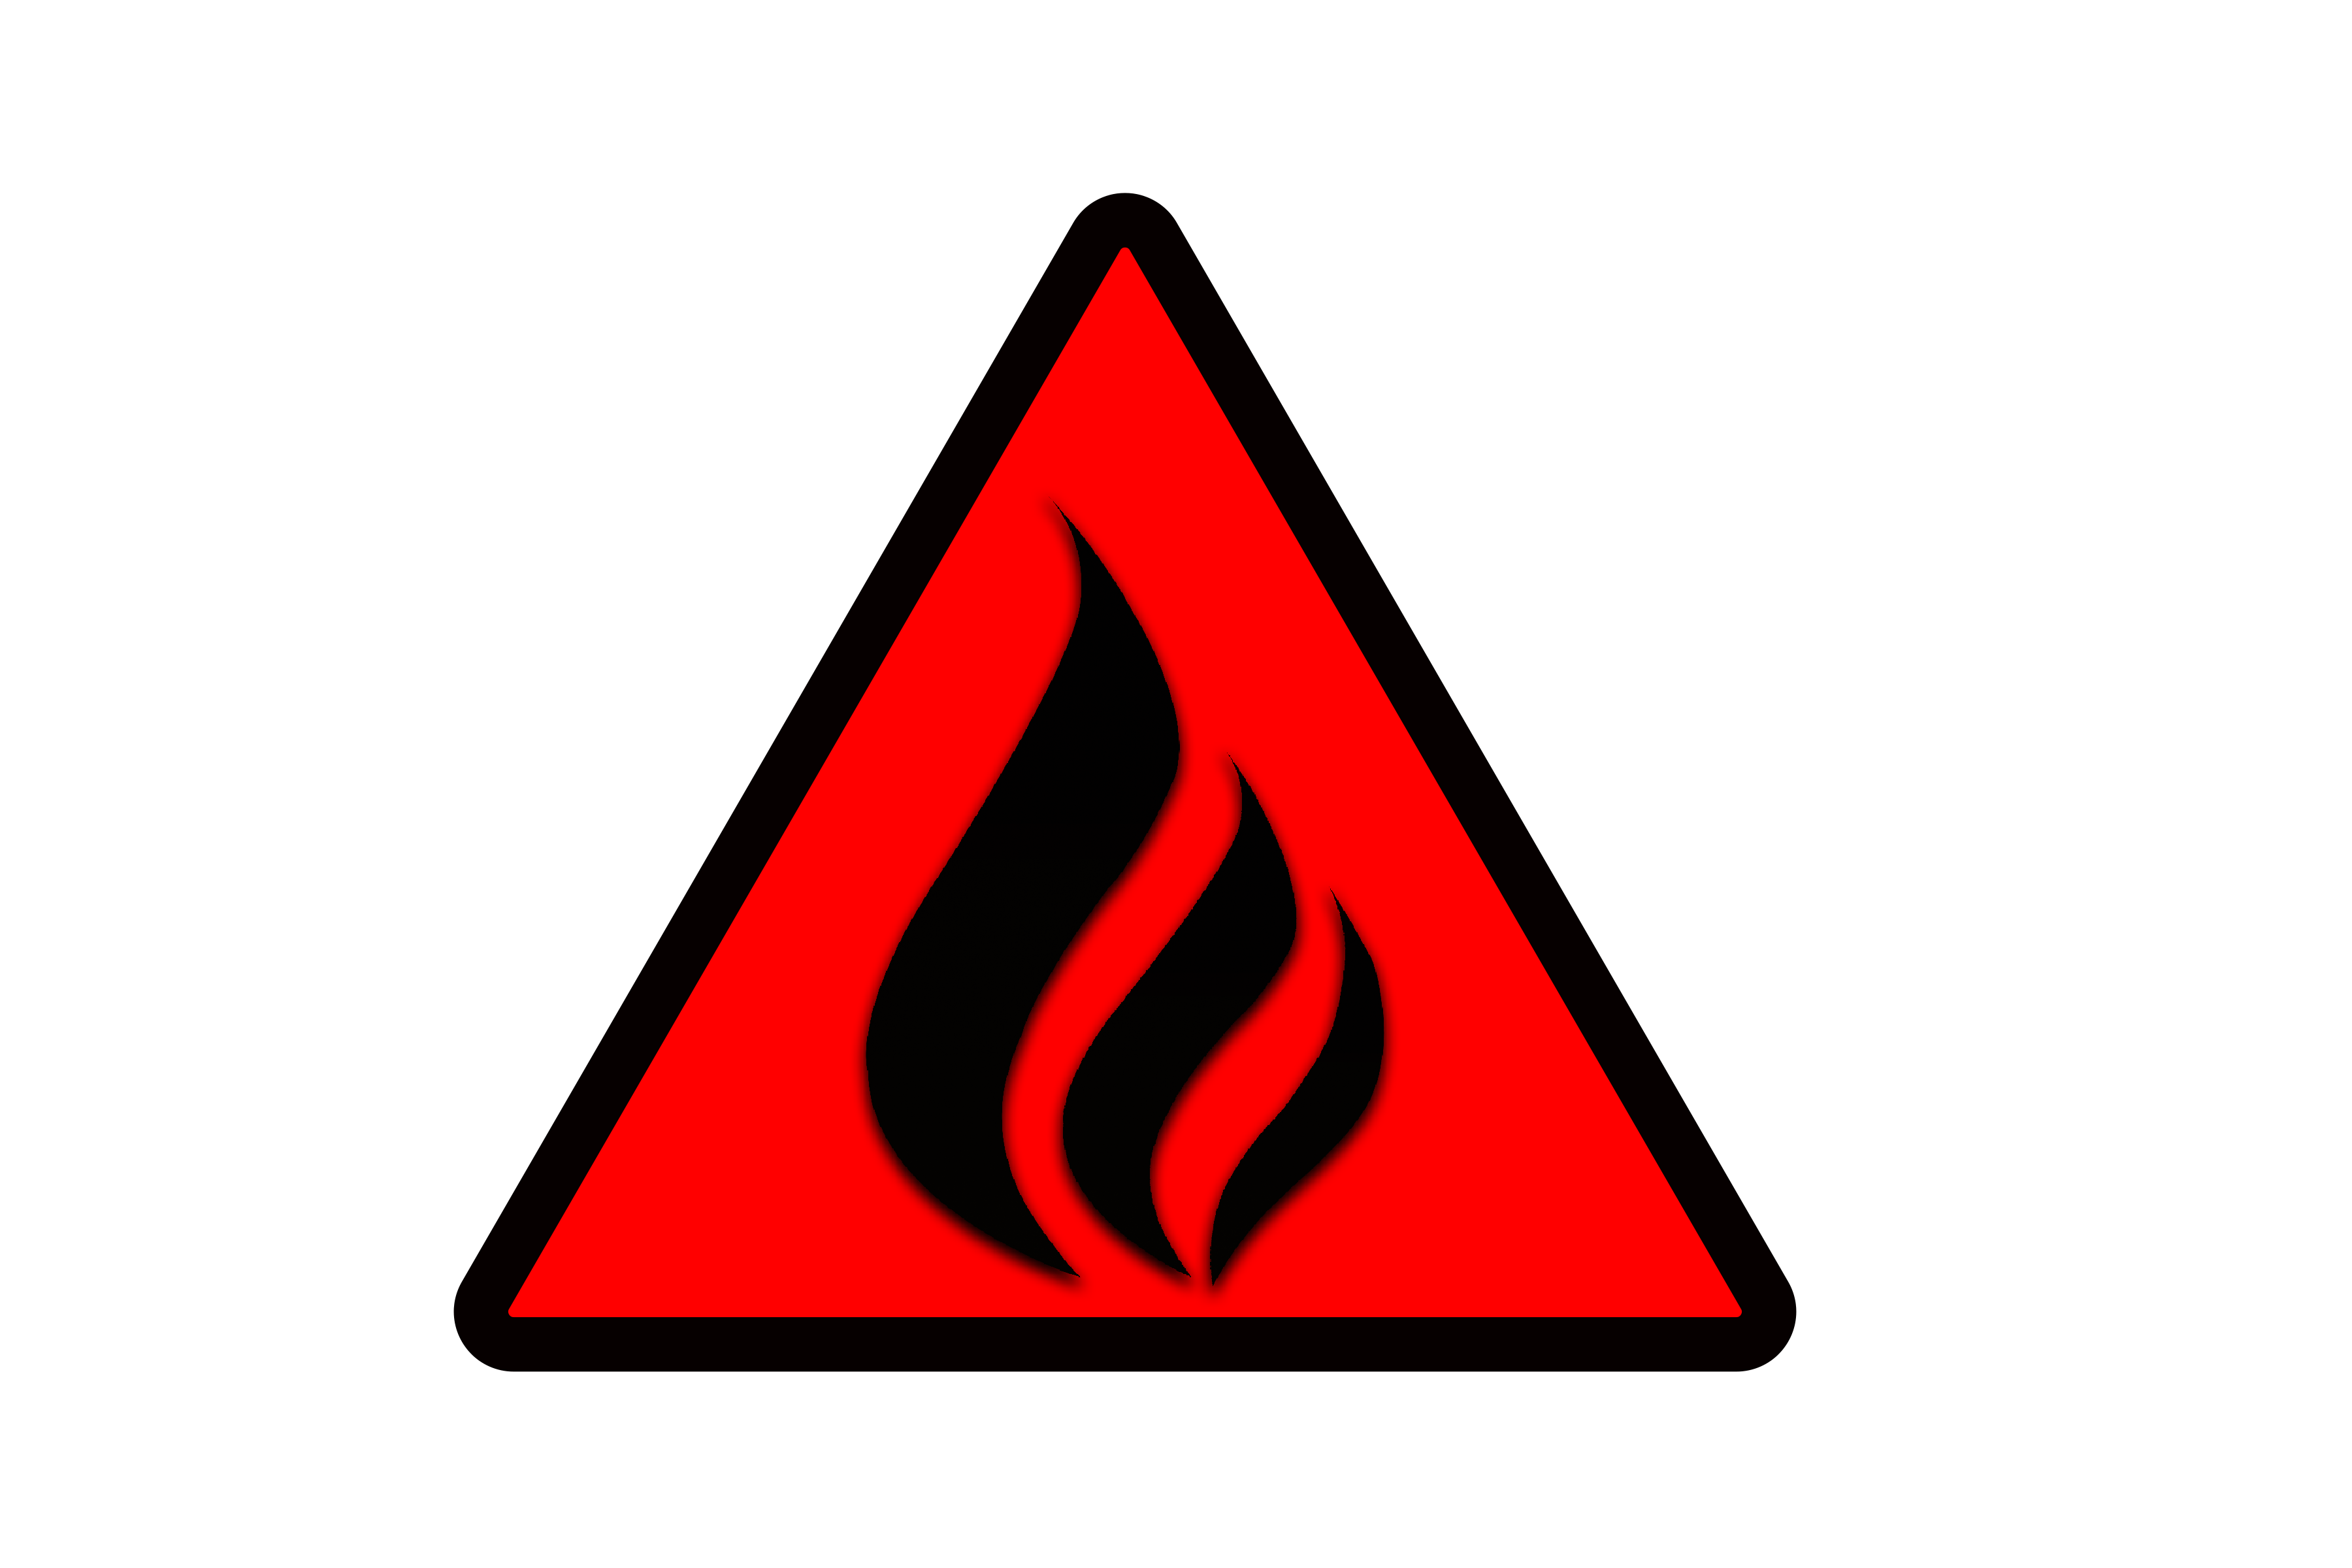 Flames Caution Fire Warning Sign Transparent PNG Free download